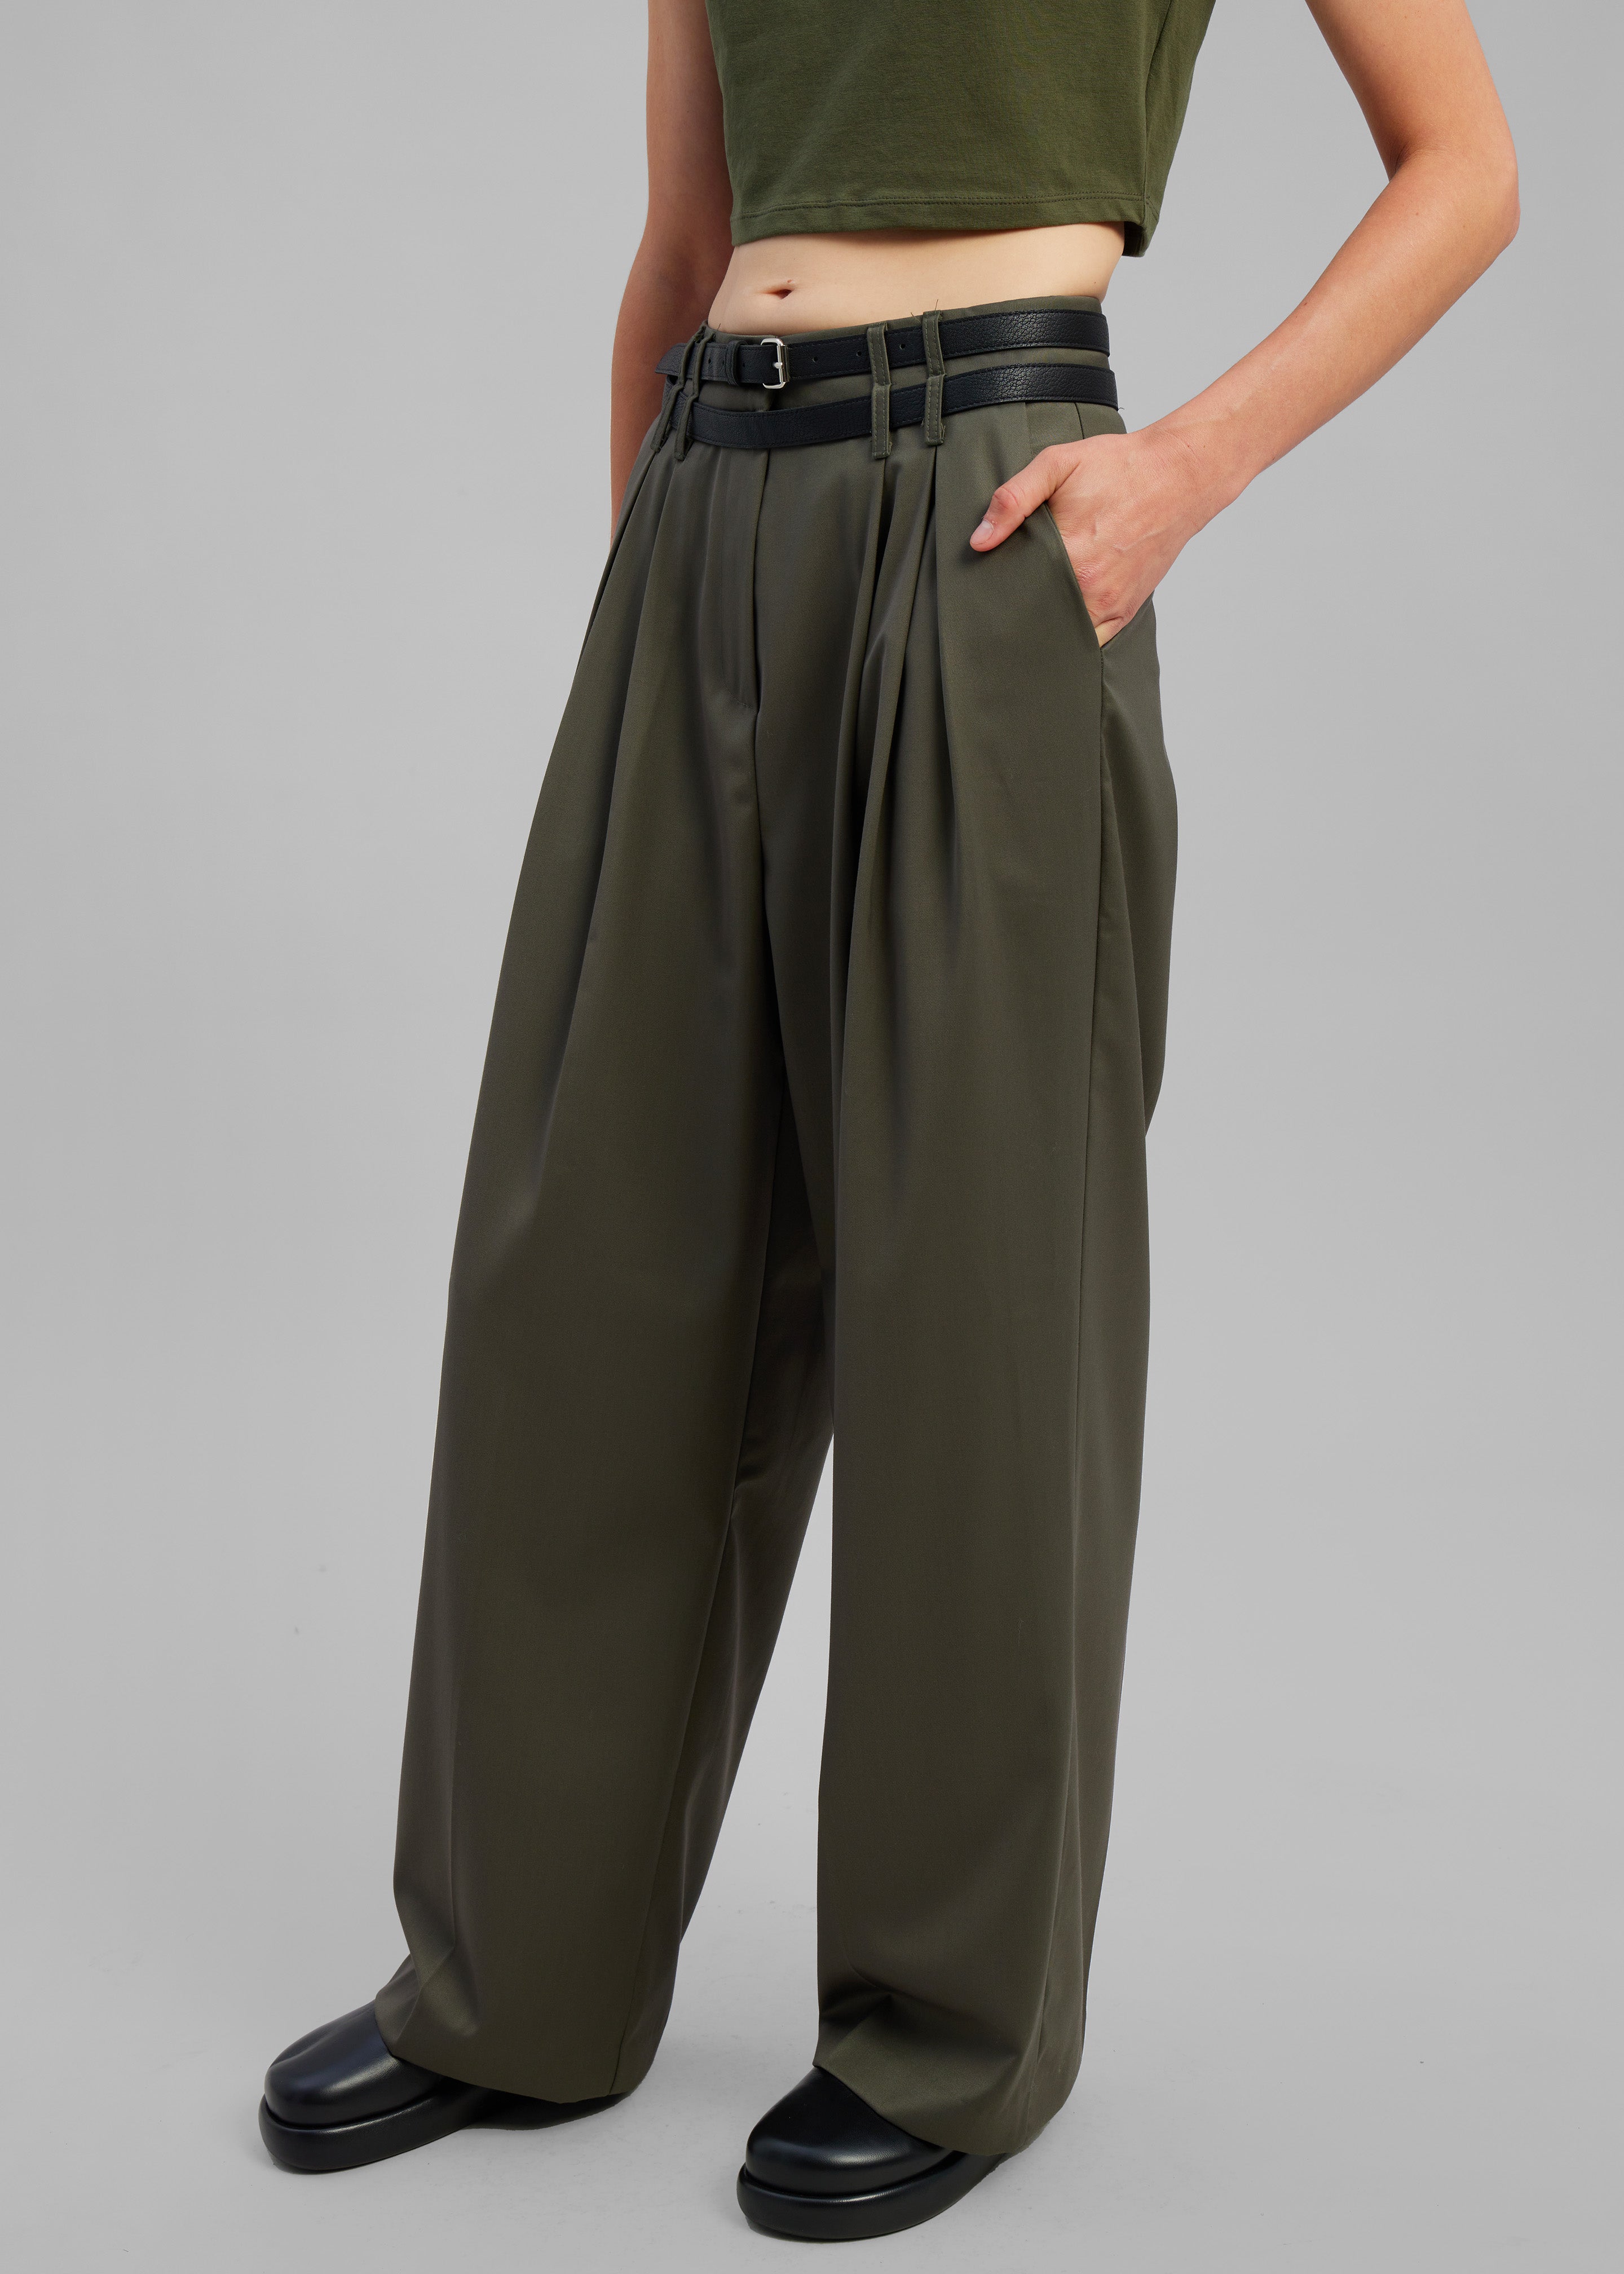 Nellie Belted Pleated Pants - Olive - 2